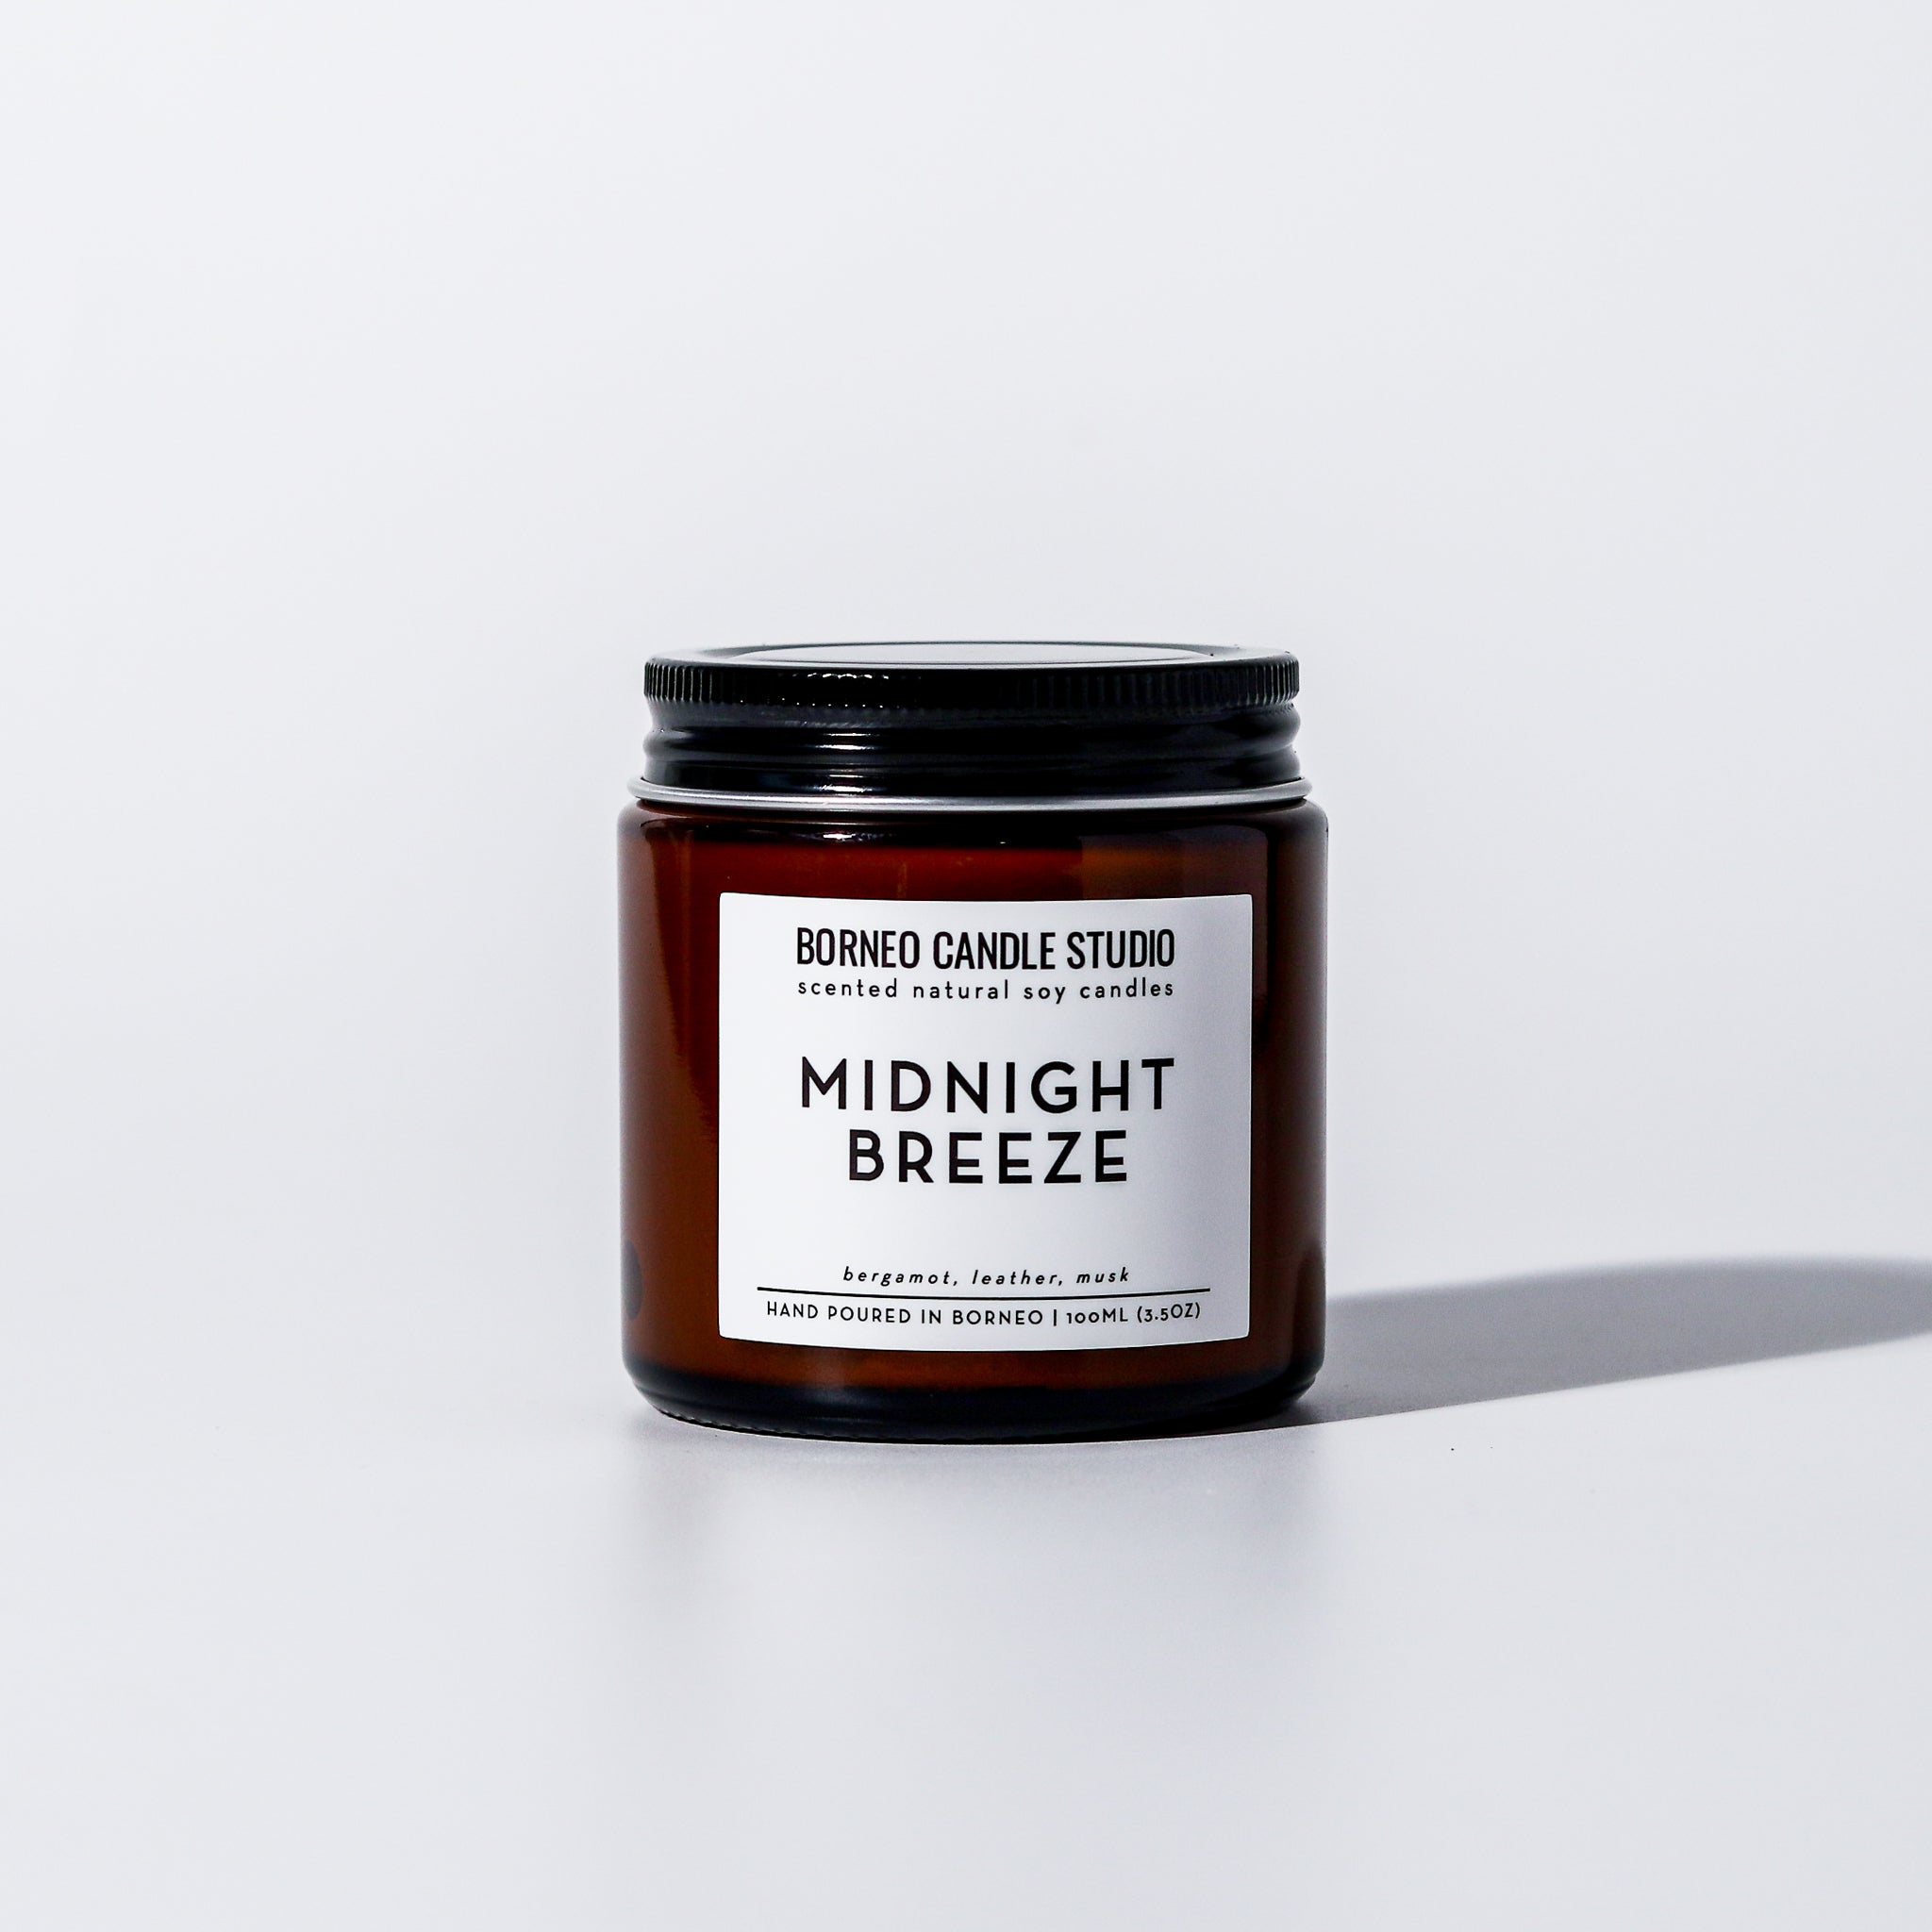 Midnight Breeze Soy Candle - Borneo Candle Studio